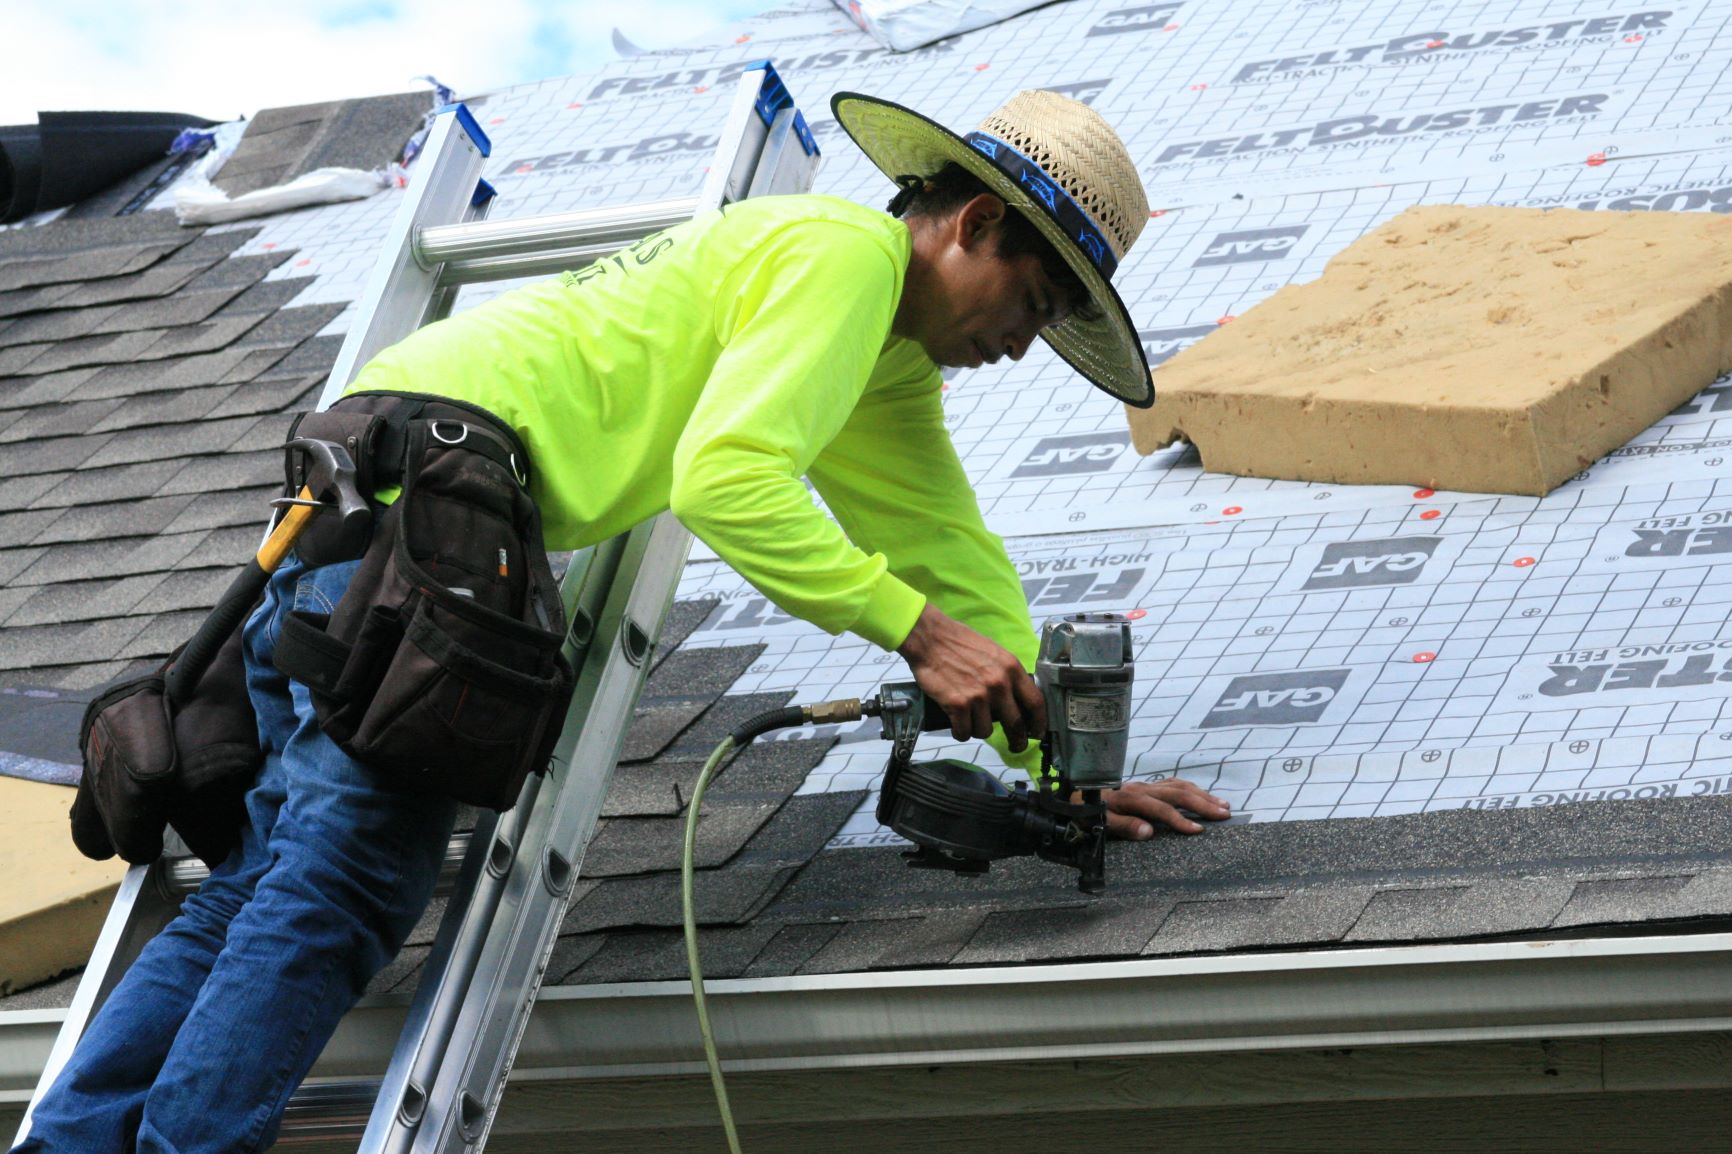 Get Fresh Roofing Leads in Just A few minutes using these Techniques